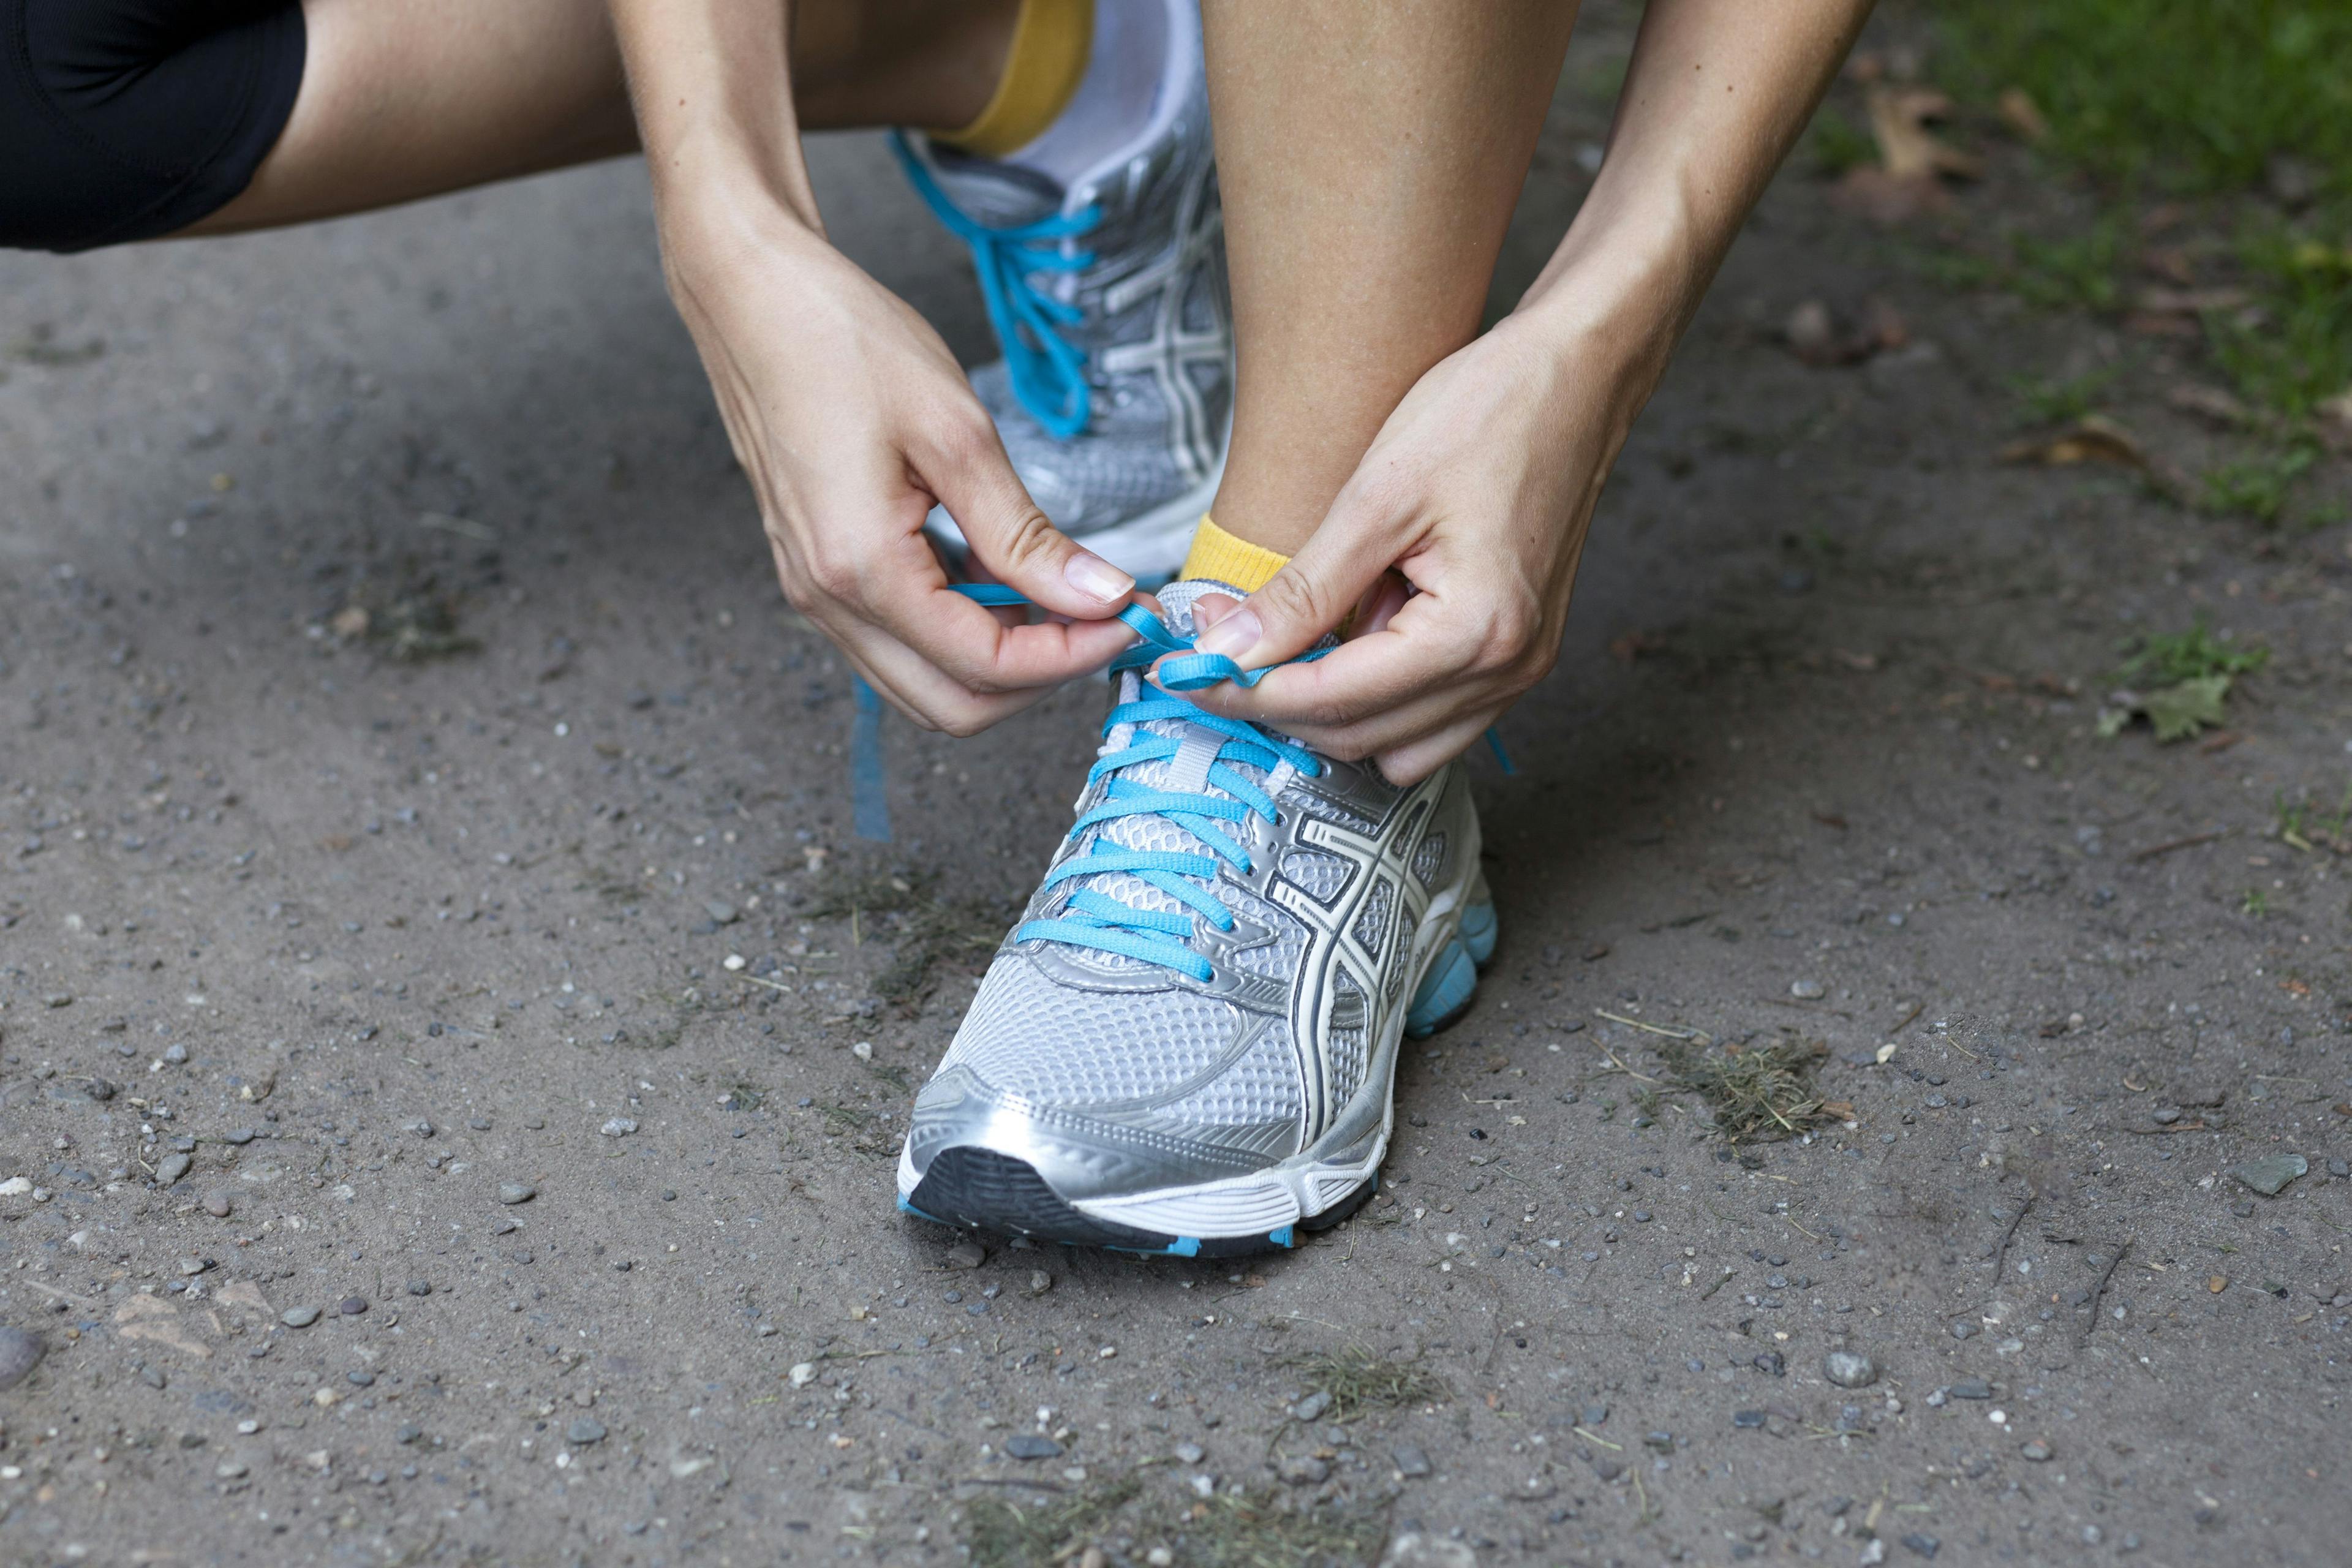 A person with type 1 diabetes tying their shoes before a run.